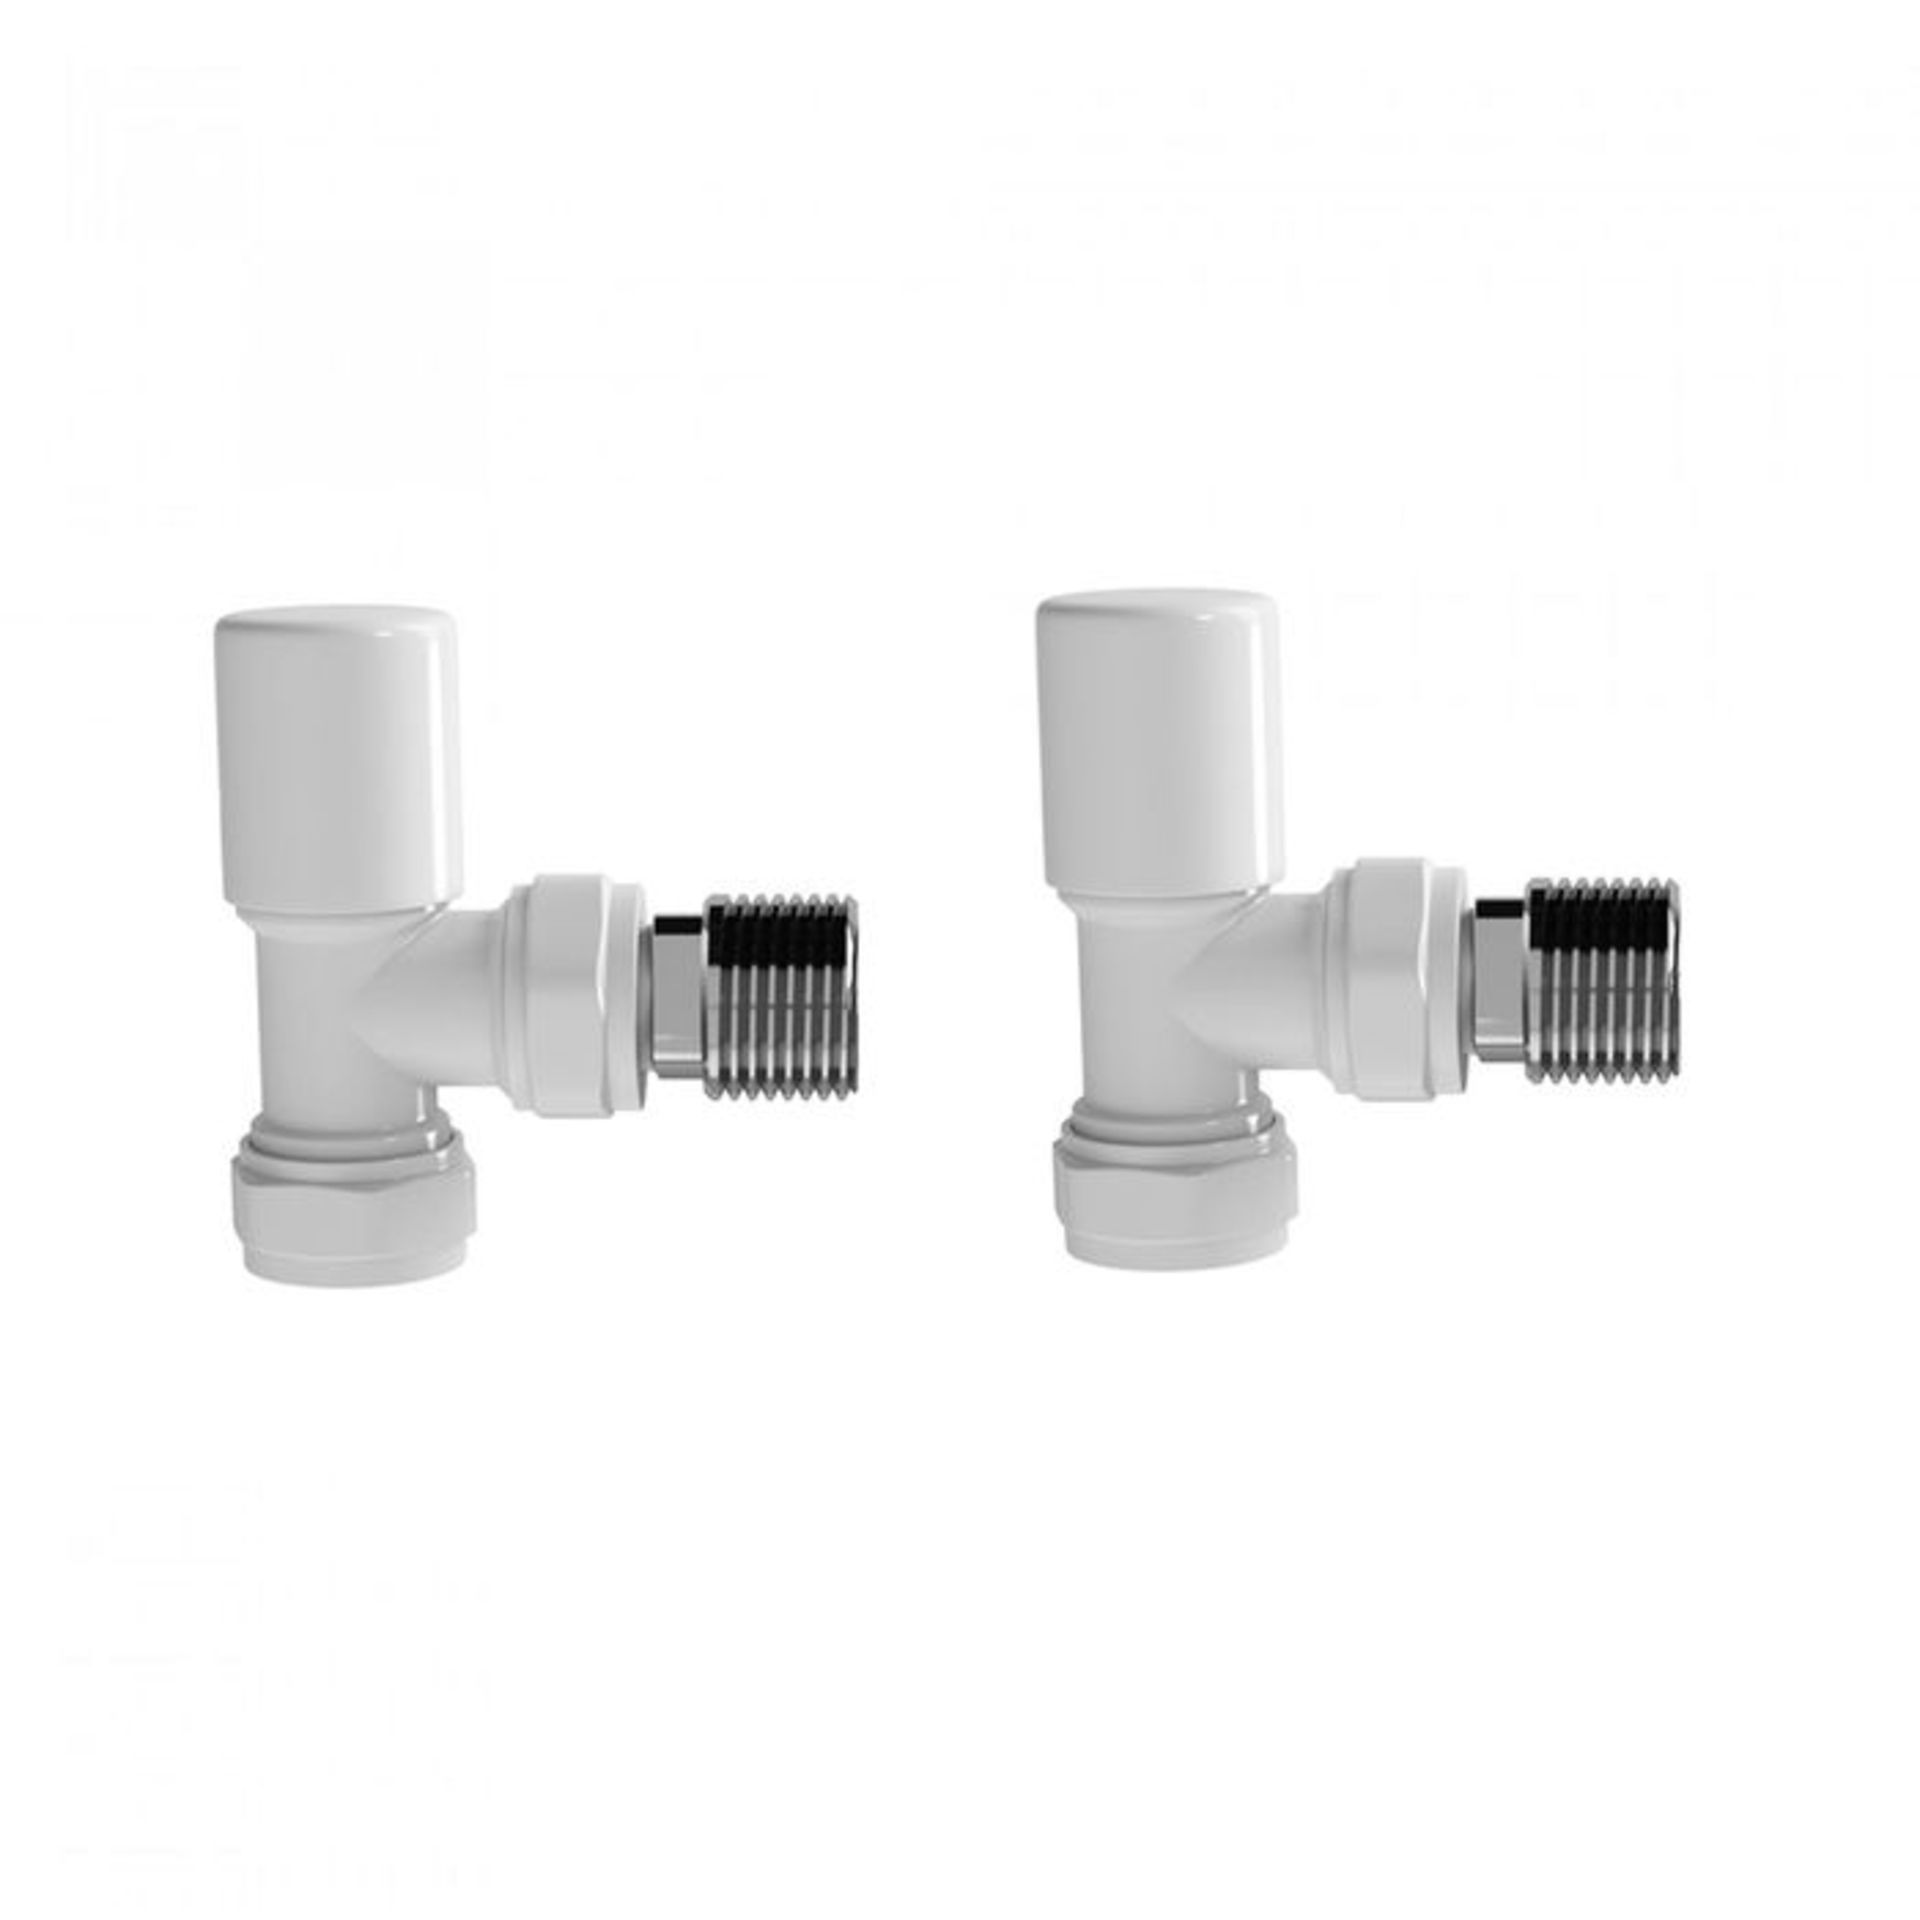 (TS299) 15mm Standard Connection Angled Gloss White Radiator Valves Solid brass construct Angled